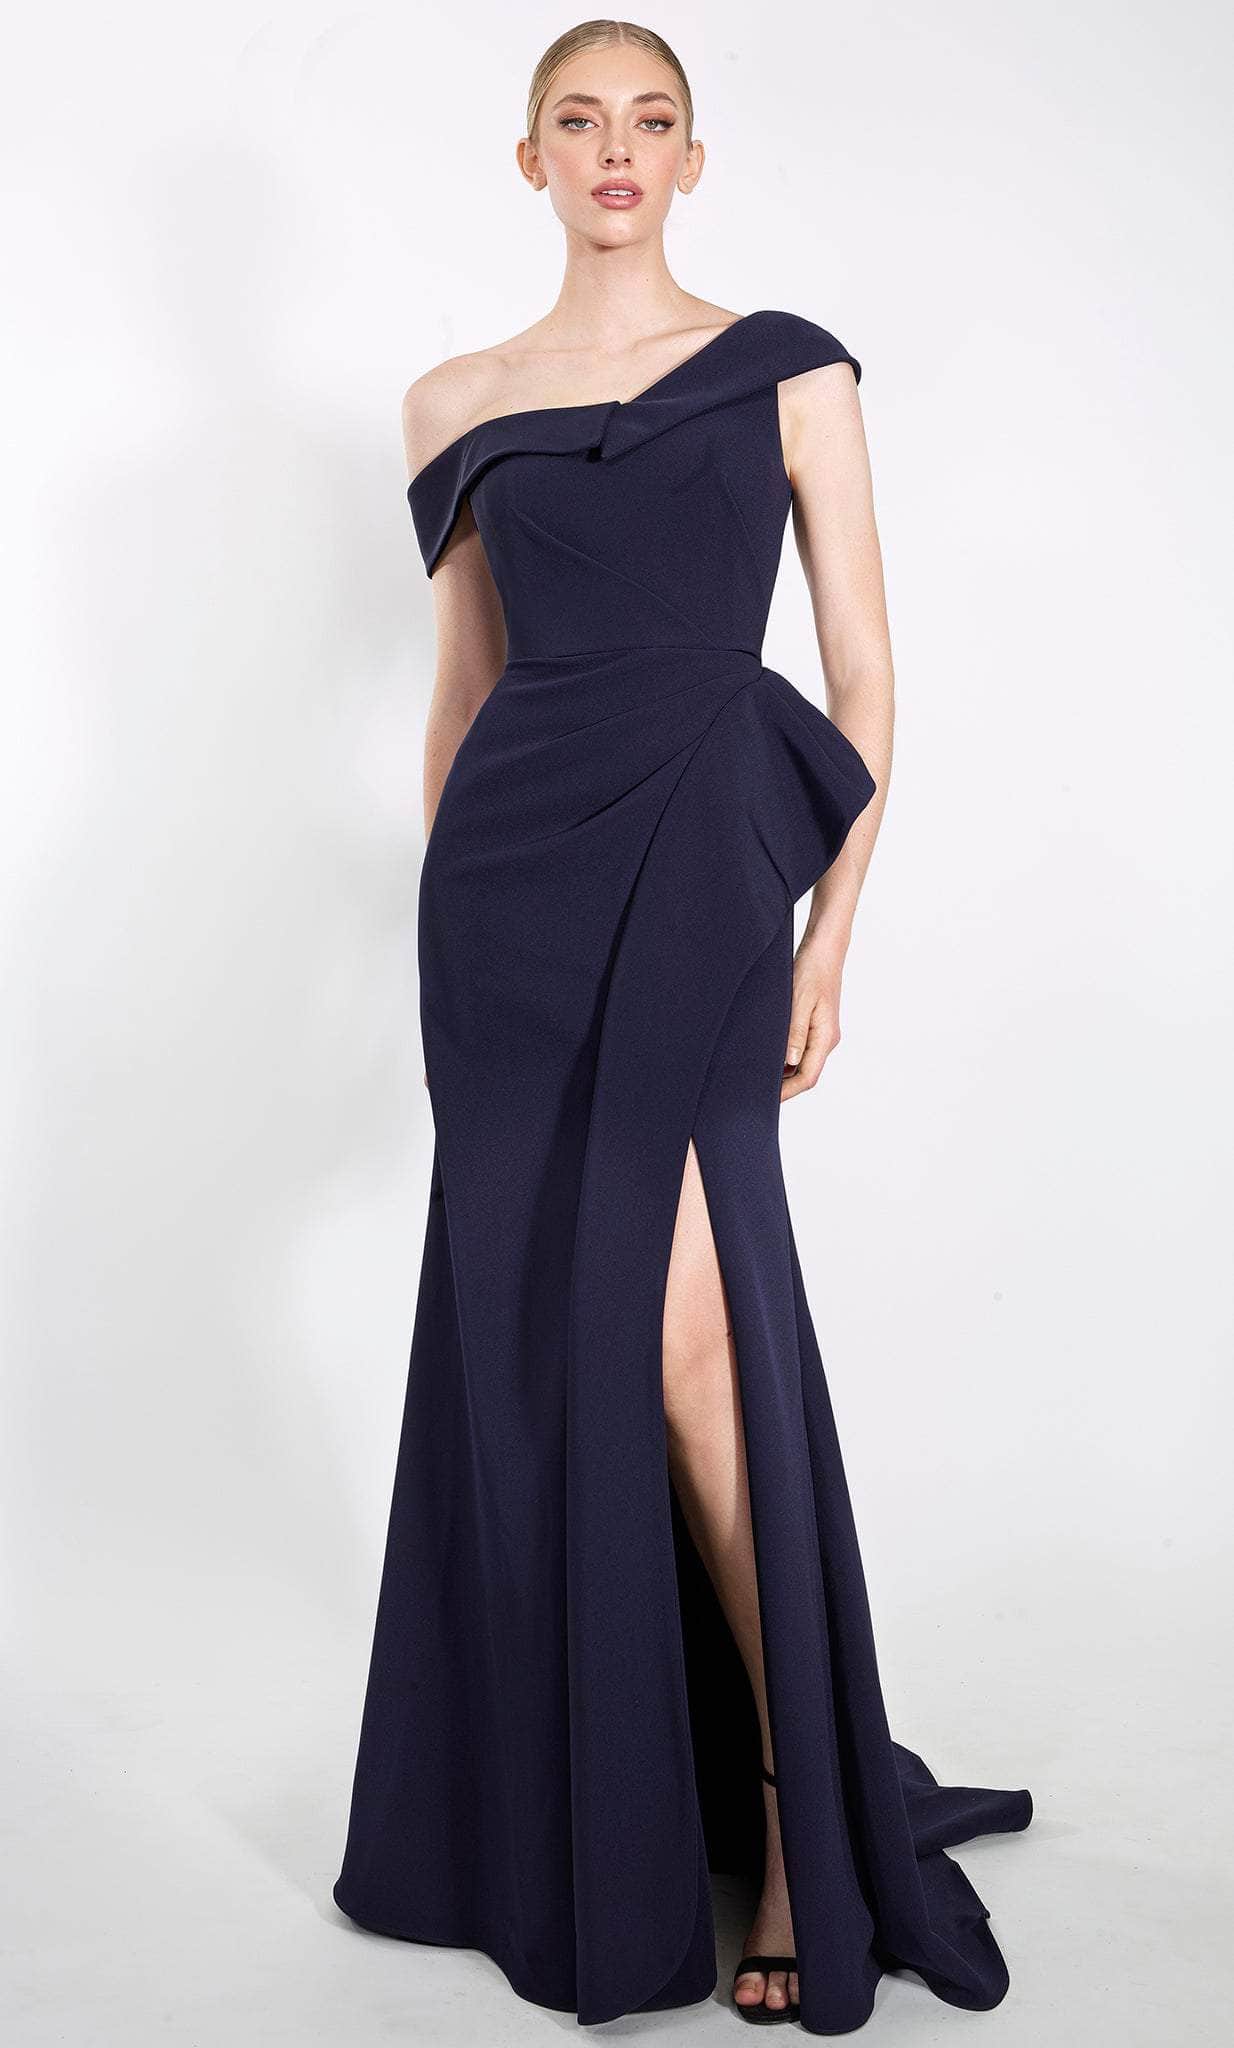 Janique 23014 - Cap Sleeve Mermaid Prom Gown Special Occasion Dress 2 / Navy